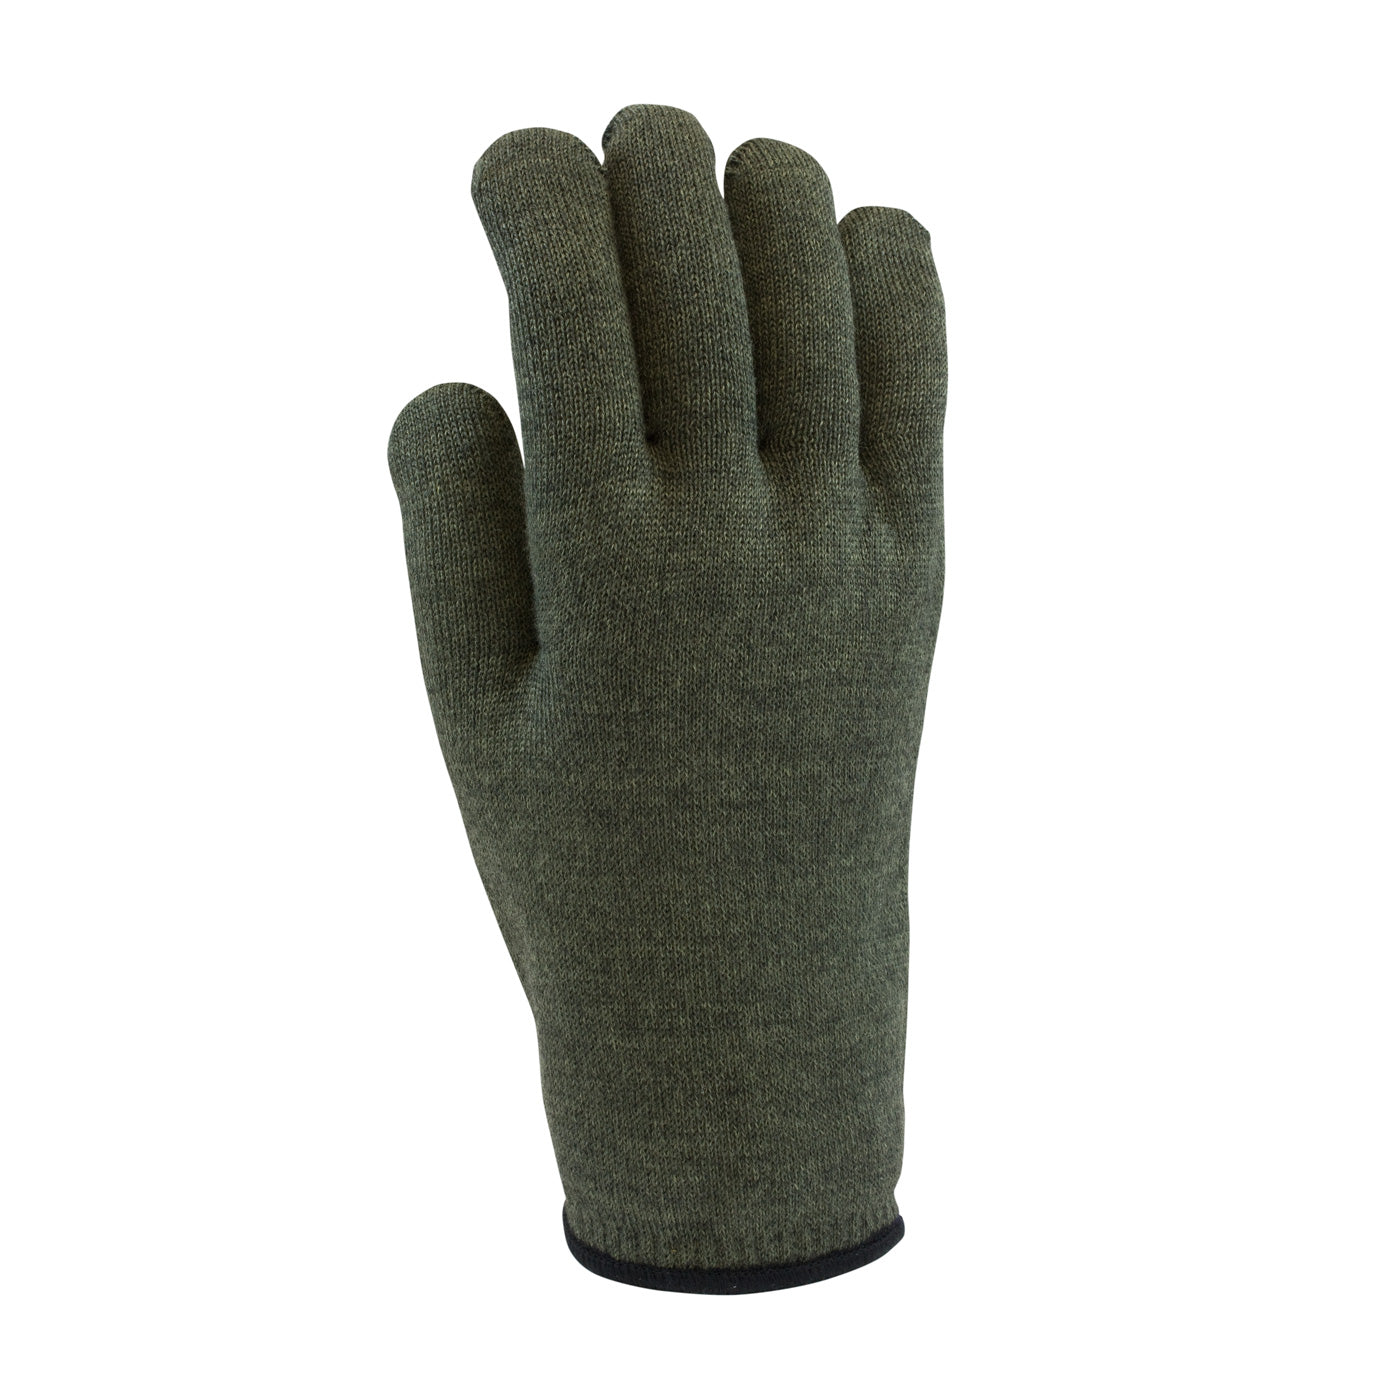 Kut Gard 43-850L DuPont Kevlar / Preox Seamless Knit Hot Mill Glove with Cotton Liner - 32 oz